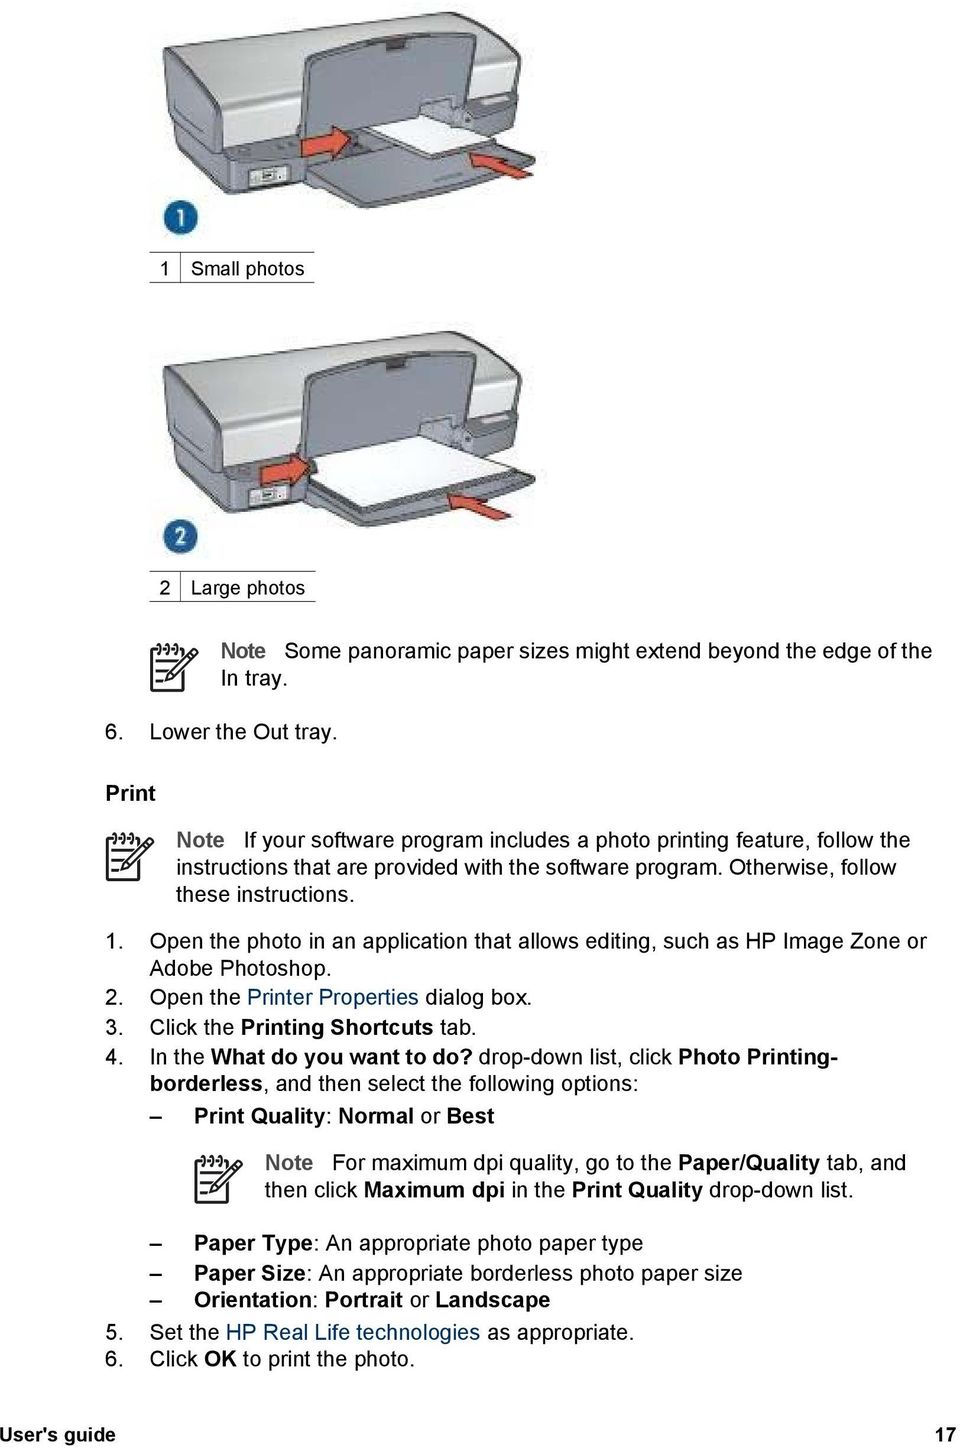 Open the photo in an application that allows editing, such as HP Image Zone or Adobe Photoshop. 2. Open the Printer Properties dialog box. 3. Click the Printing Shortcuts tab. 4.